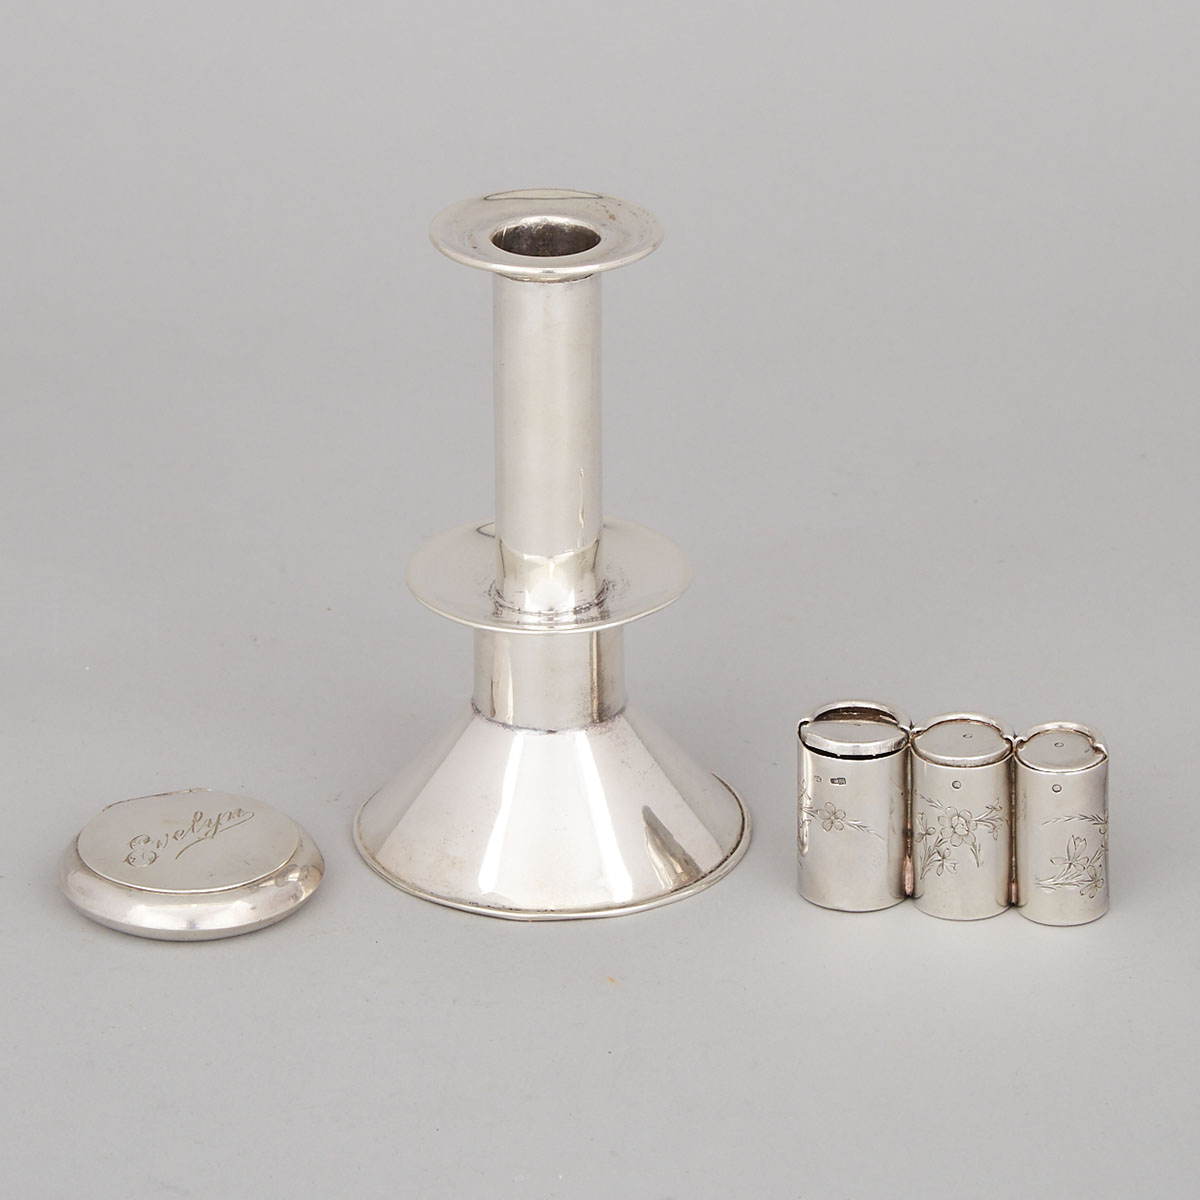 English Silver Candlestick, American Compact and a Russian Coin Case, 20th century